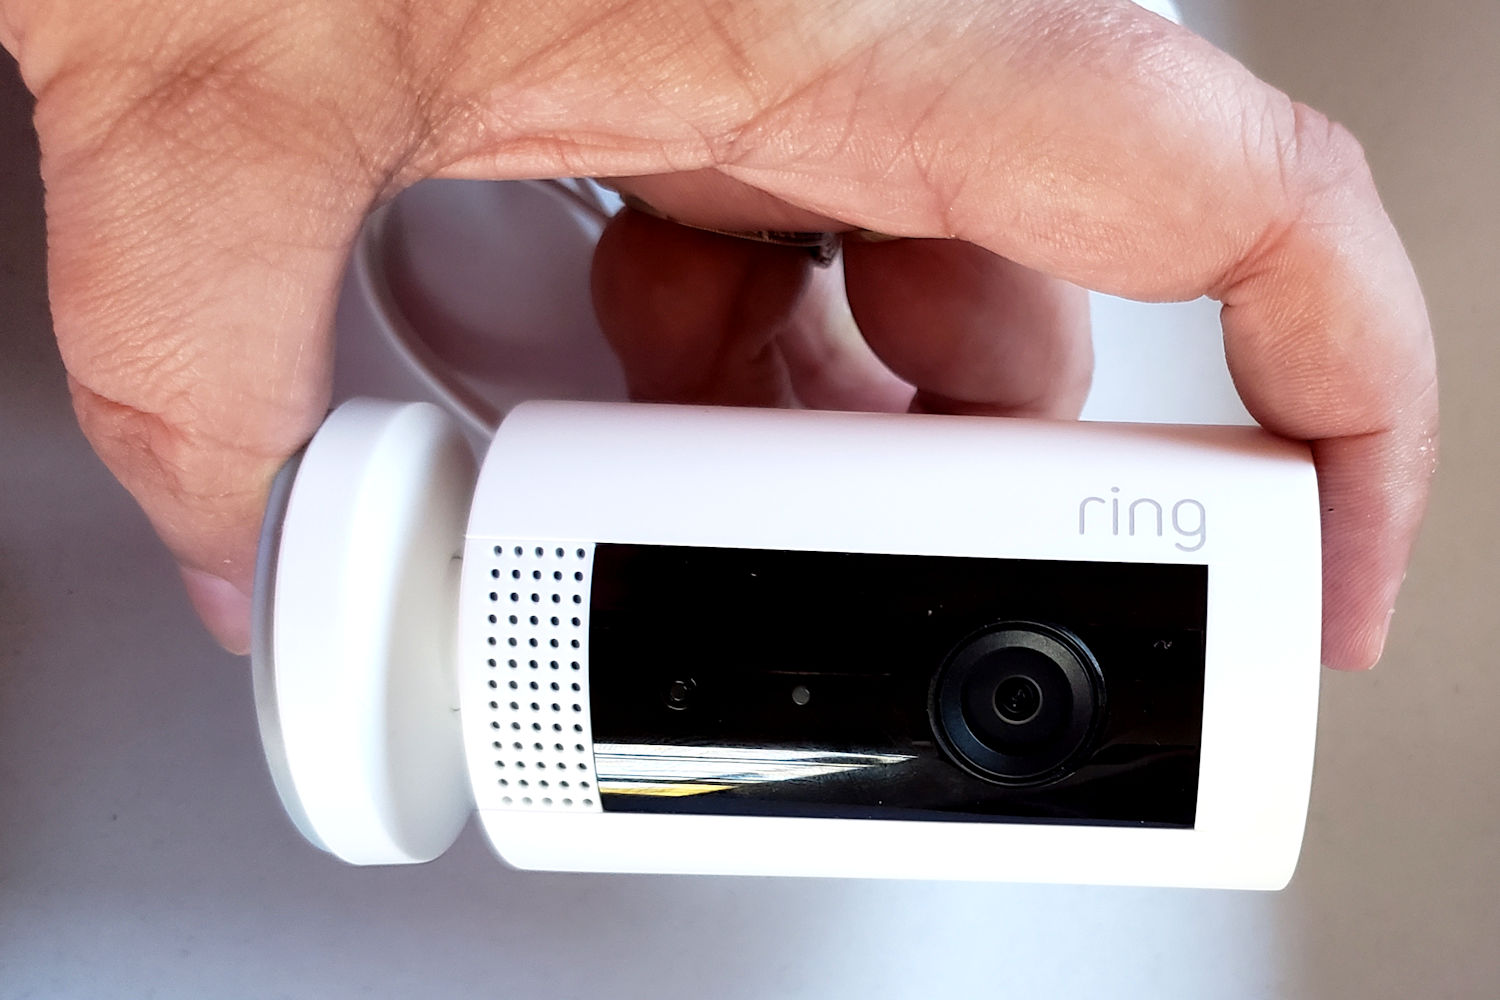 Your Ring camera features are about to change, and not in a good way